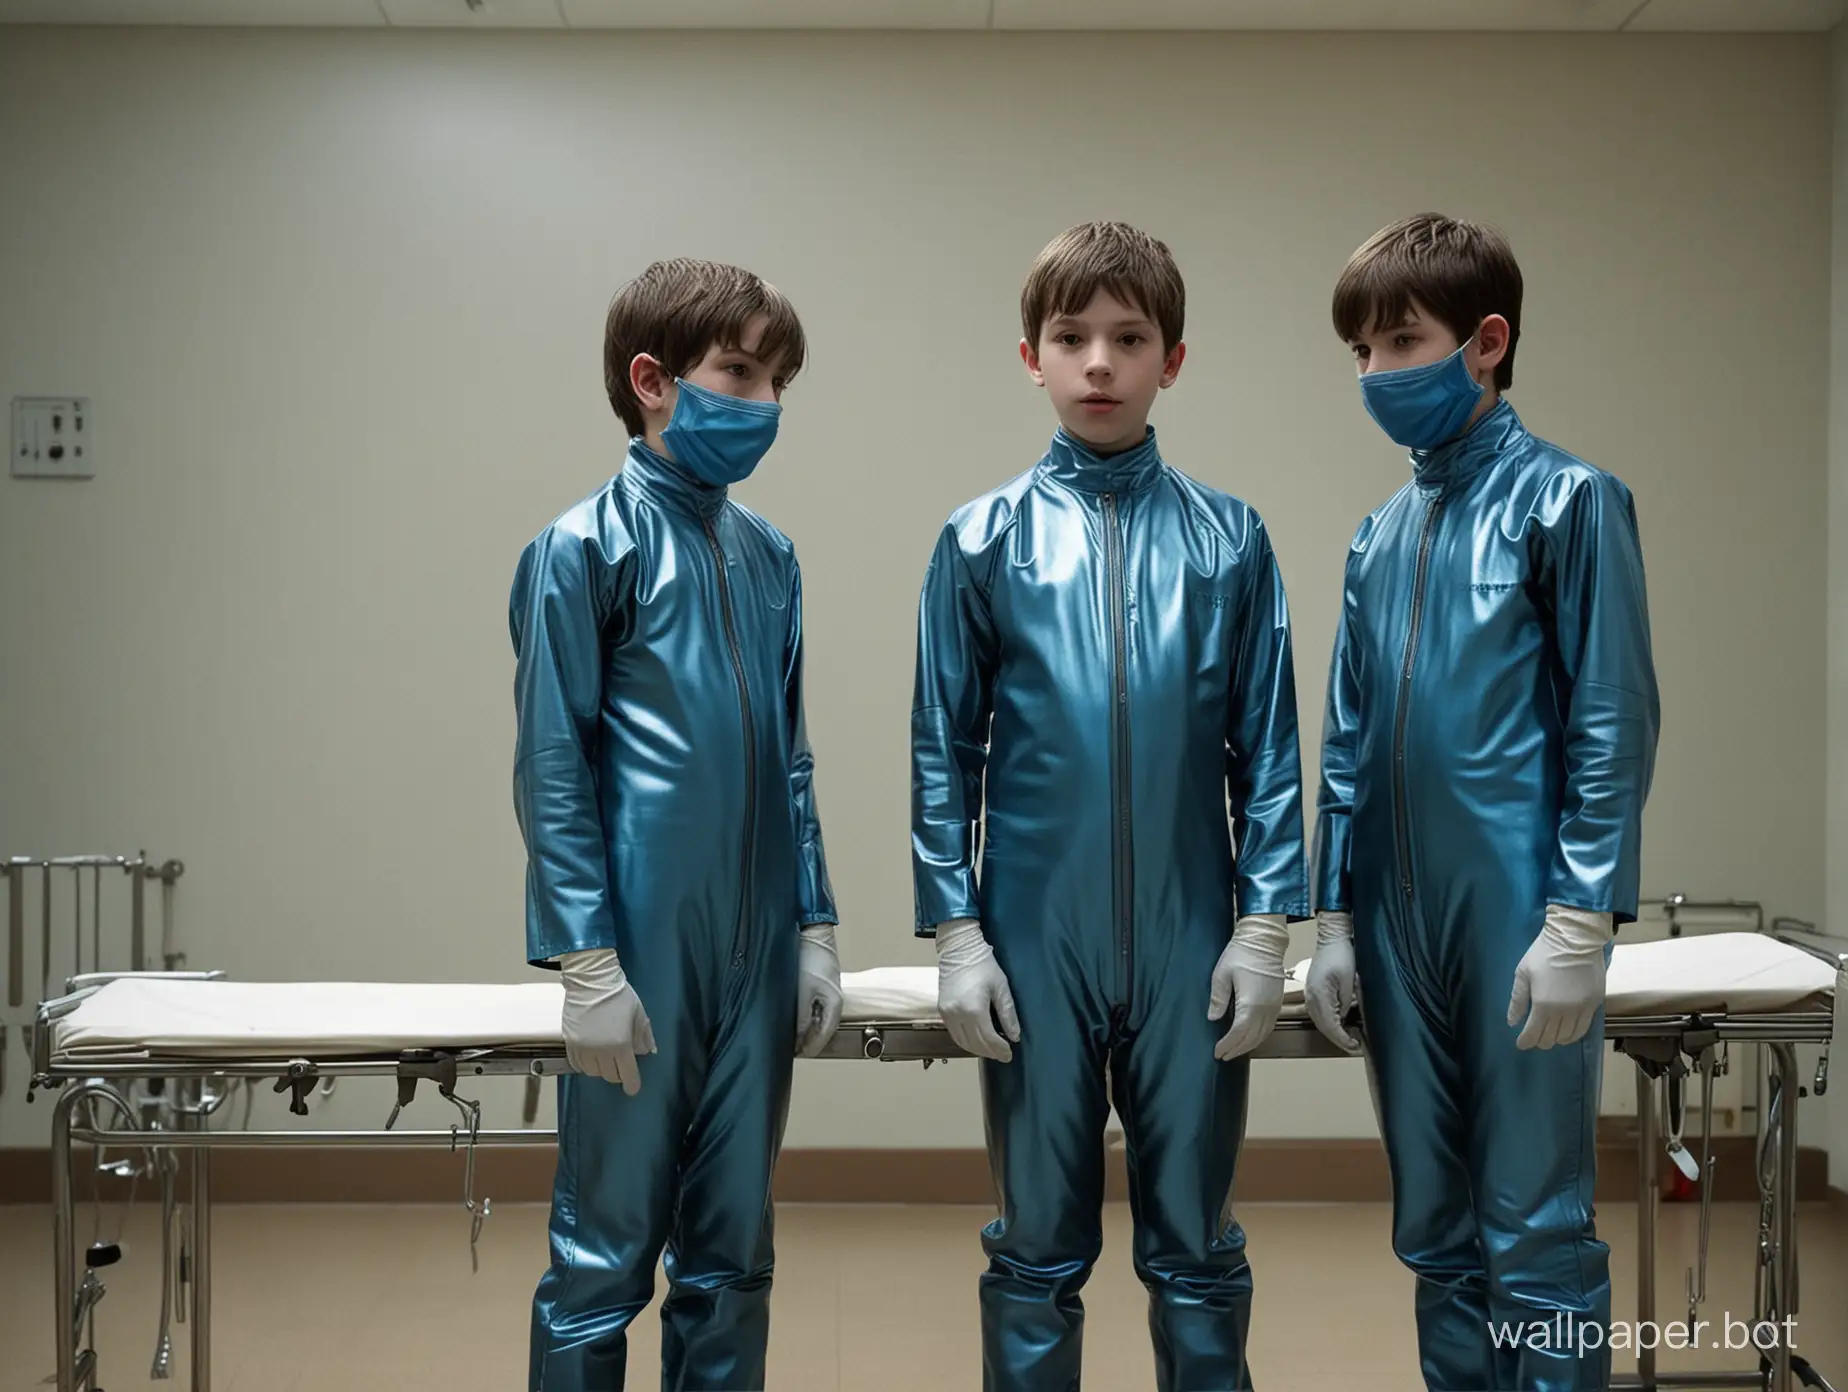 Two young boys, roughly around the ages of 10 and 12, standing side by side in a dimly lit room. They are both wearing identical latex suits that only reveal their eyes and mouths, leaving the rest of their bodies covered from head to toe. The suits are a shiny, metallic blue color that reflects the dim light in the room, making their bodies appear almost ethereal. The boys' hair is neatly combed and styled, contrasting against the tight, shiny material of the suits. Their eyes sparkle with excitement and anticipation, while their lips are slightly parted, revealing rows of small, even teeth. The room itself is decorated with various pieces of medical equipment, including a stretcher, a tray with various medical instruments, and a large, sterilized operating table. A pair of surgical gloves rests on the table, waiting for the hands that will use them. The overall atmosphere of the image is both mysterious and somewhat intimidating, as the boys seem to be preparing for some sort of important procedure or event.